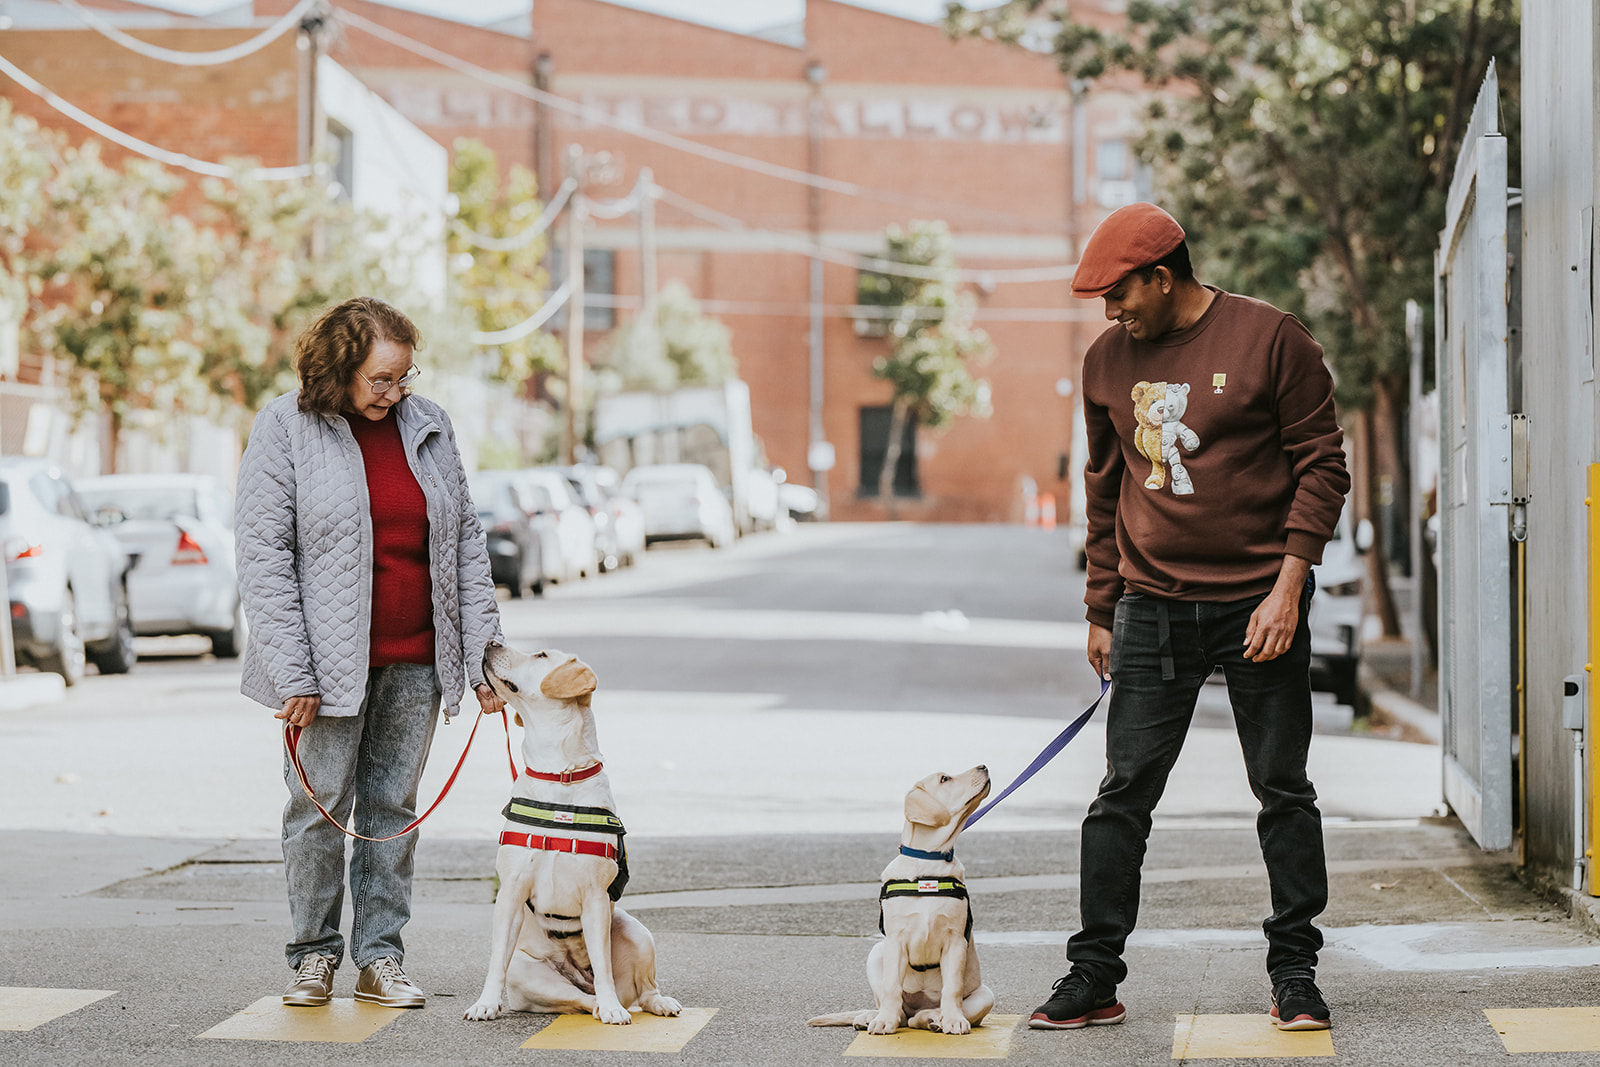 A older woman and young man are standing on a road, holding leads. The woman is smiling down at her adult Seeing Eye Dog in harness and the man is smiling down at his Seeing Eye Dogs puppy in harness